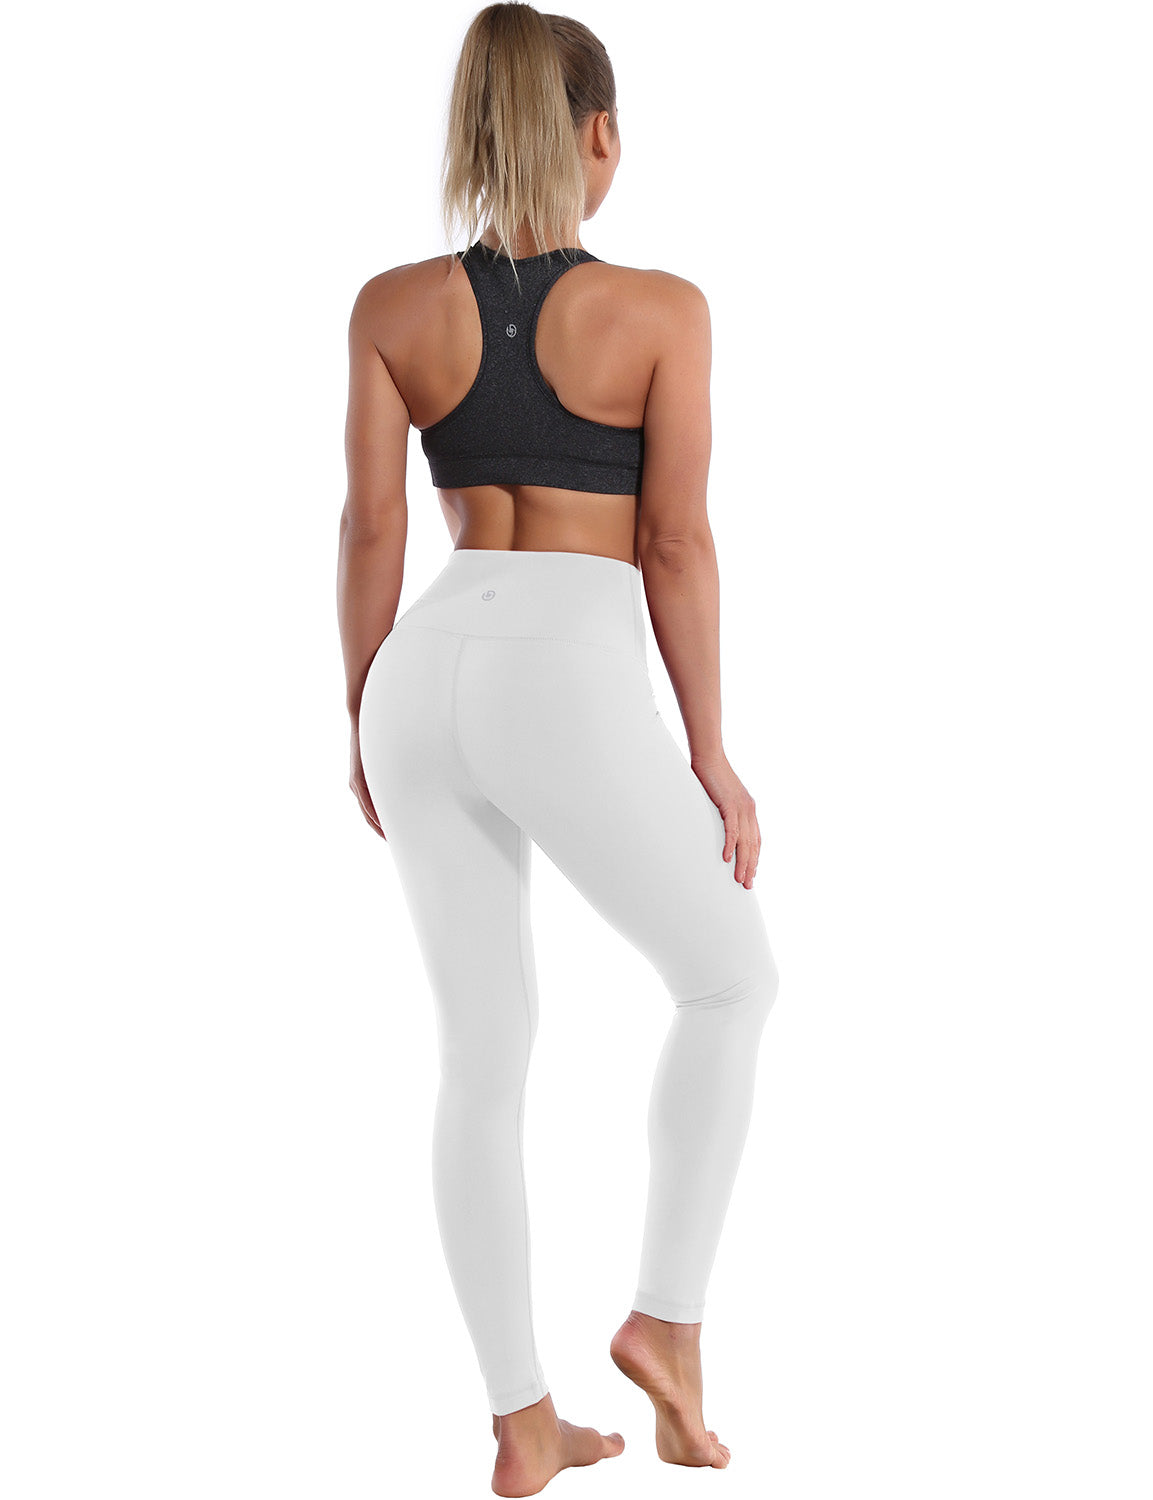 High Waist Yoga Pants white 75%Nylon/25%Spandex Fabric doesn't attract lint easily 4-way stretch No see-through Moisture-wicking Tummy control Inner pocket Four lengths